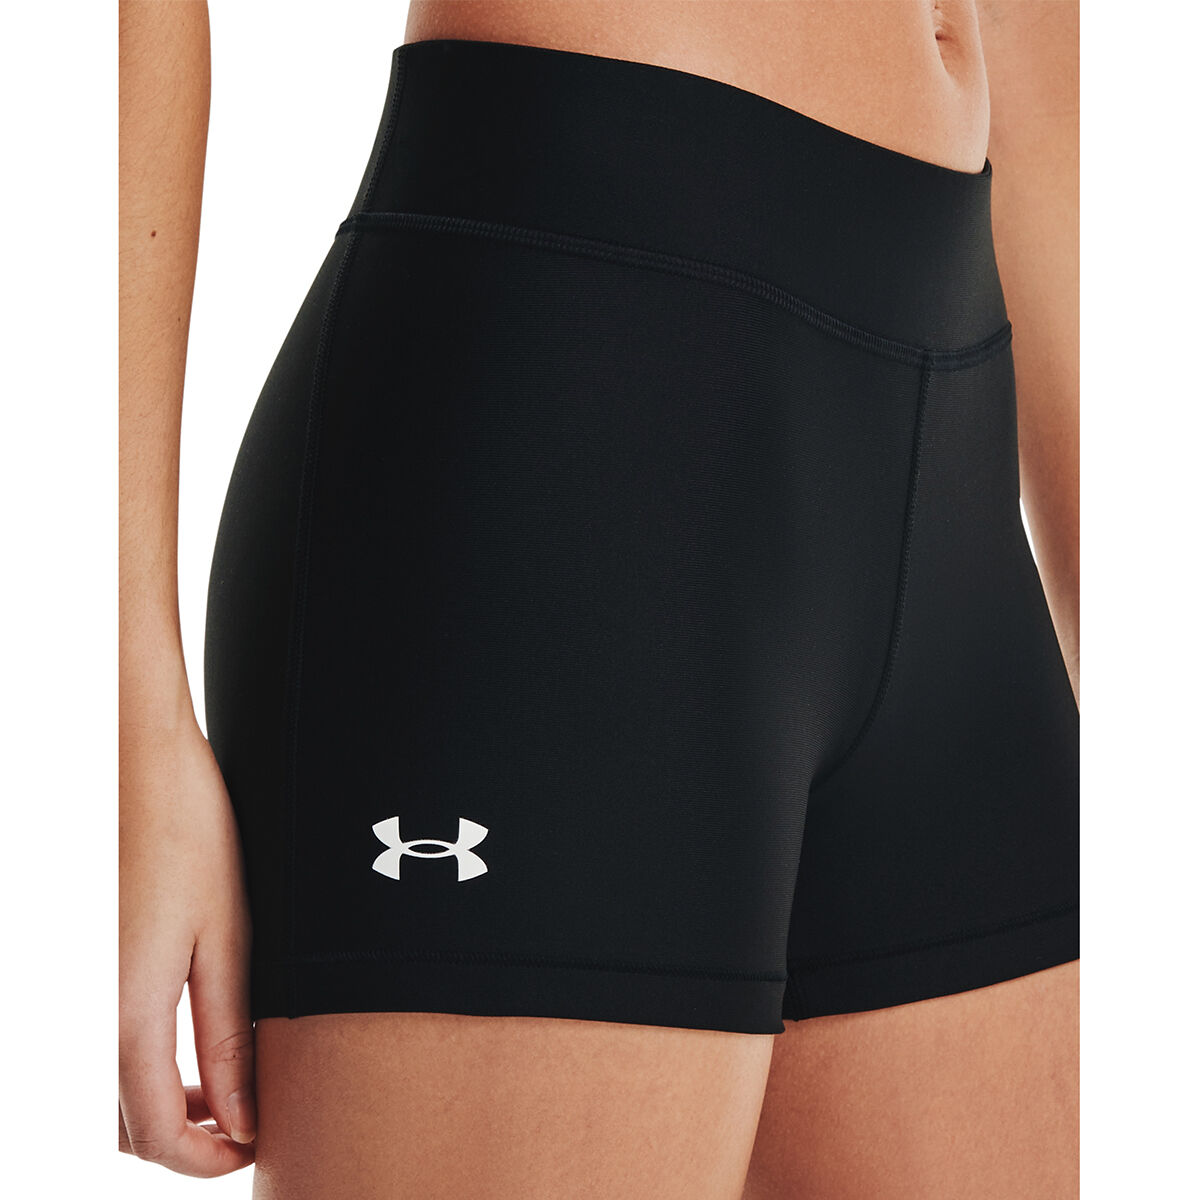 Under Armour Womens' Authentic 4 Compression Shorts  Sports wear outfits, Under  armour shorts women, Gymnastics outfits